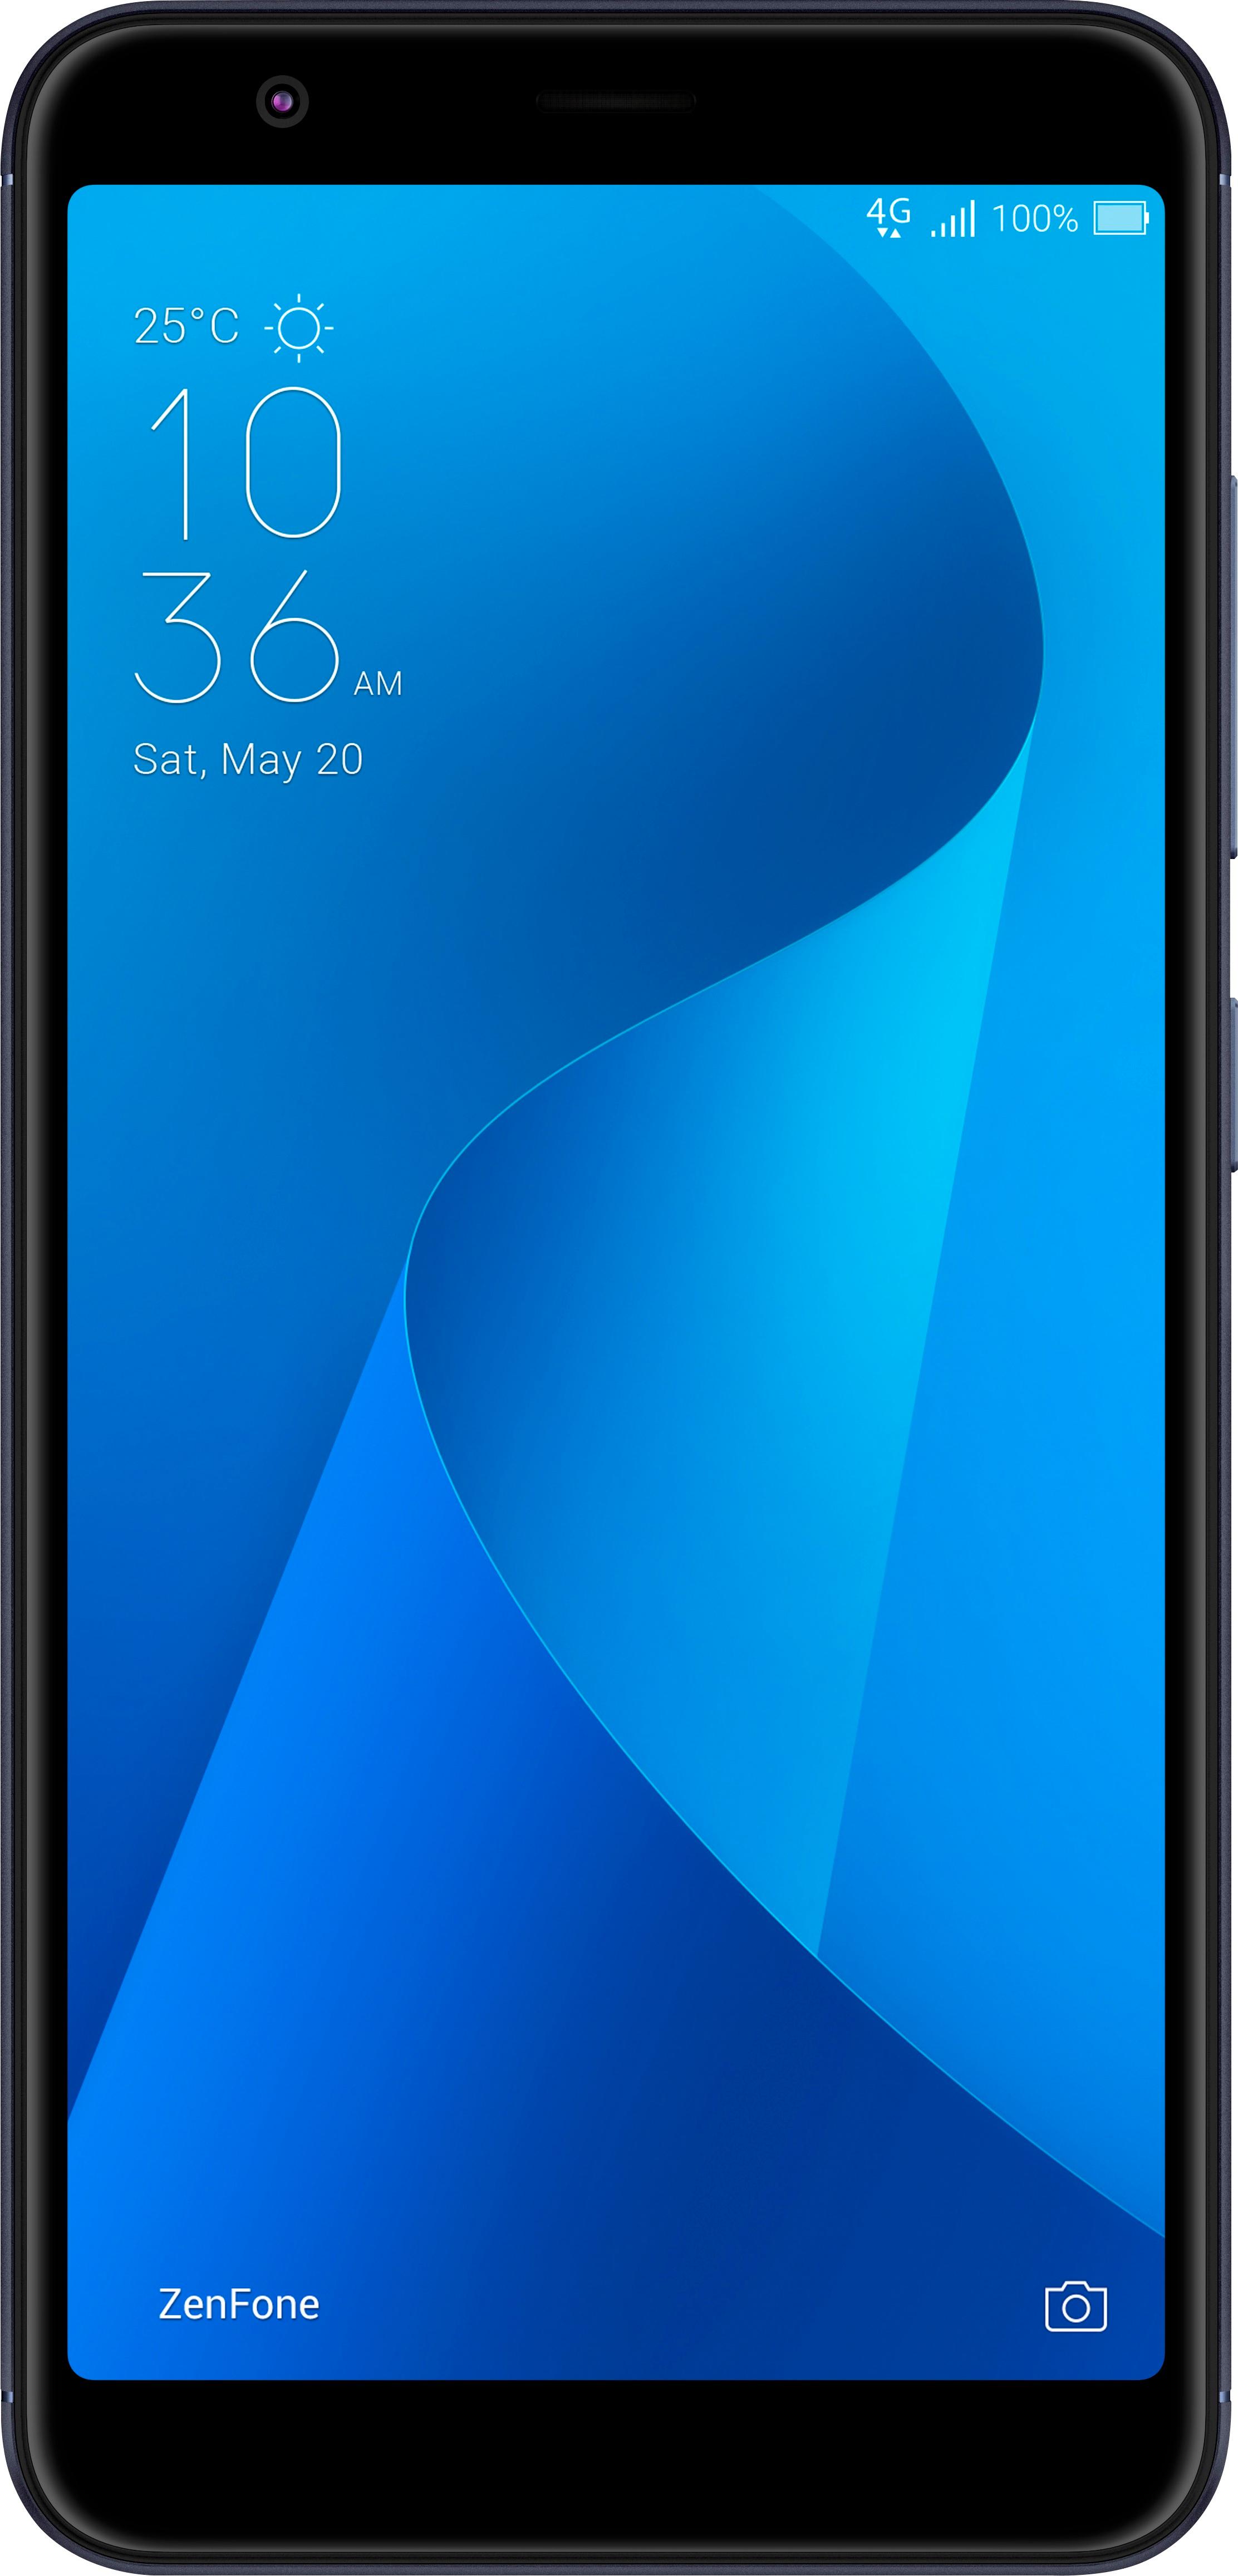 ASUS ZenFone Max Plus M1 4G LTE with 32GB Memory - Best Buy